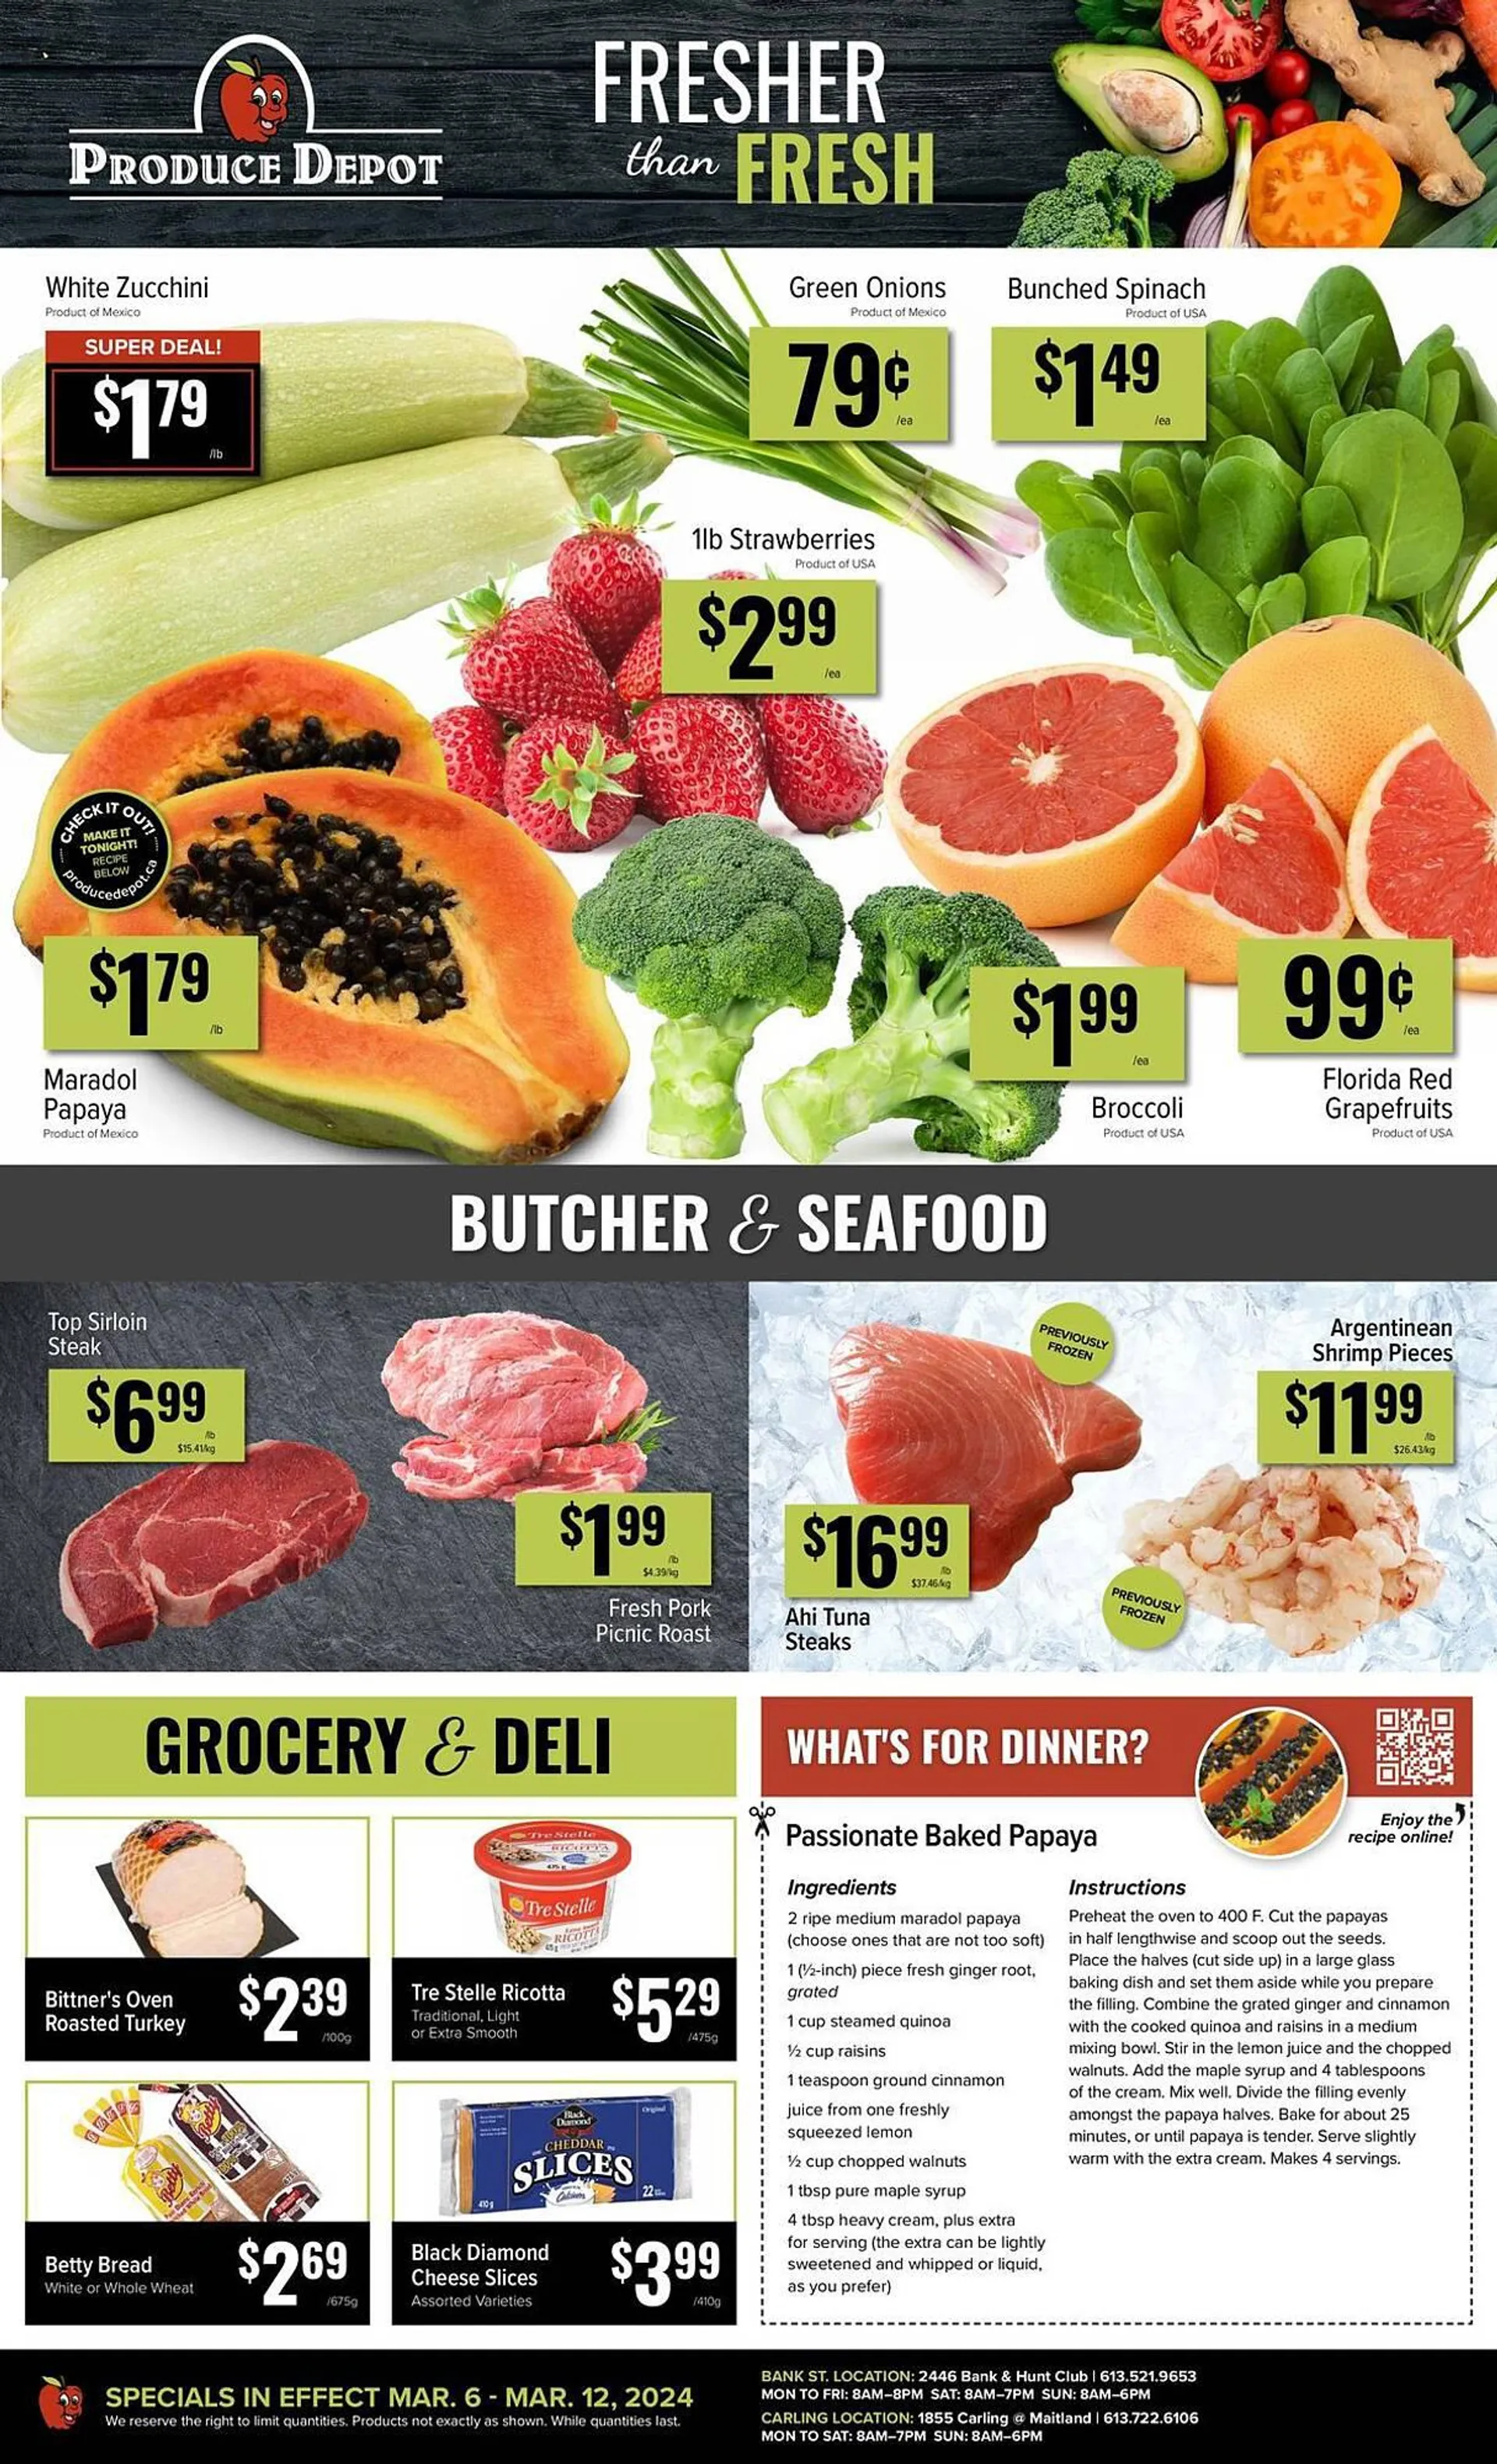 Produce Depot flyer from March 6 to March 20 2024 - flyer page 